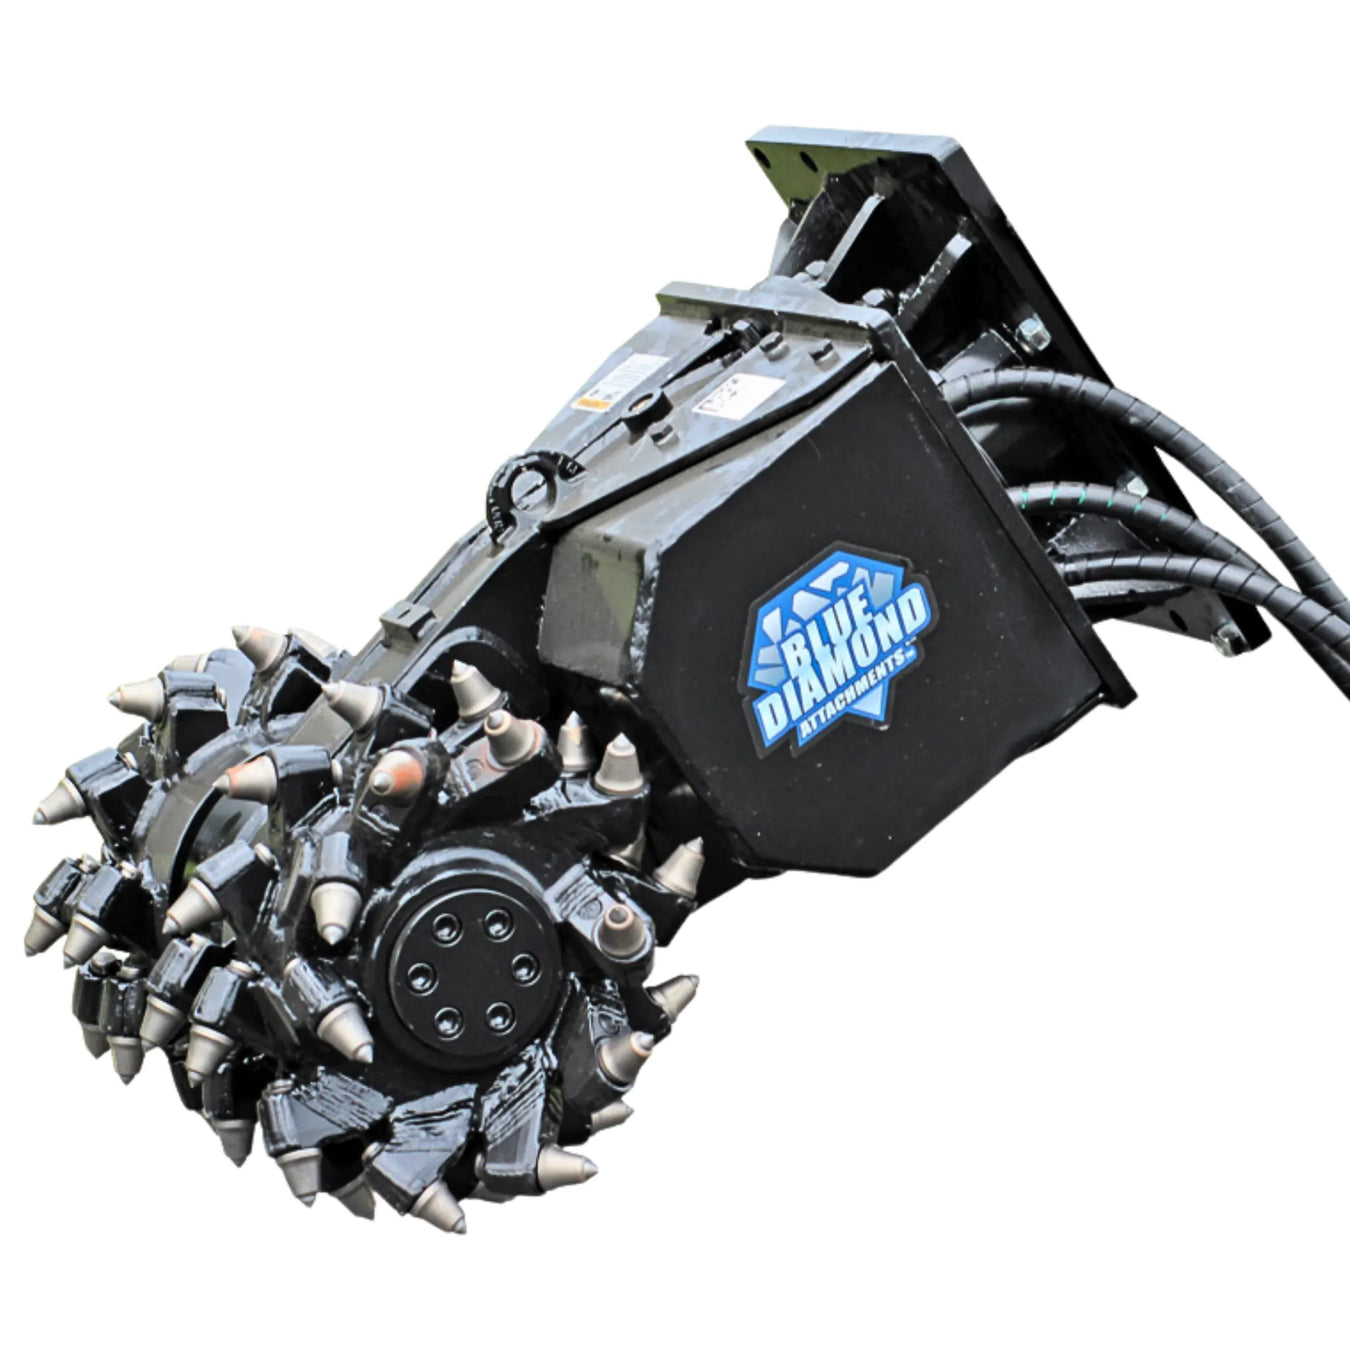 Blue Diamond Rock and Concrete Grinder for Skid Steers